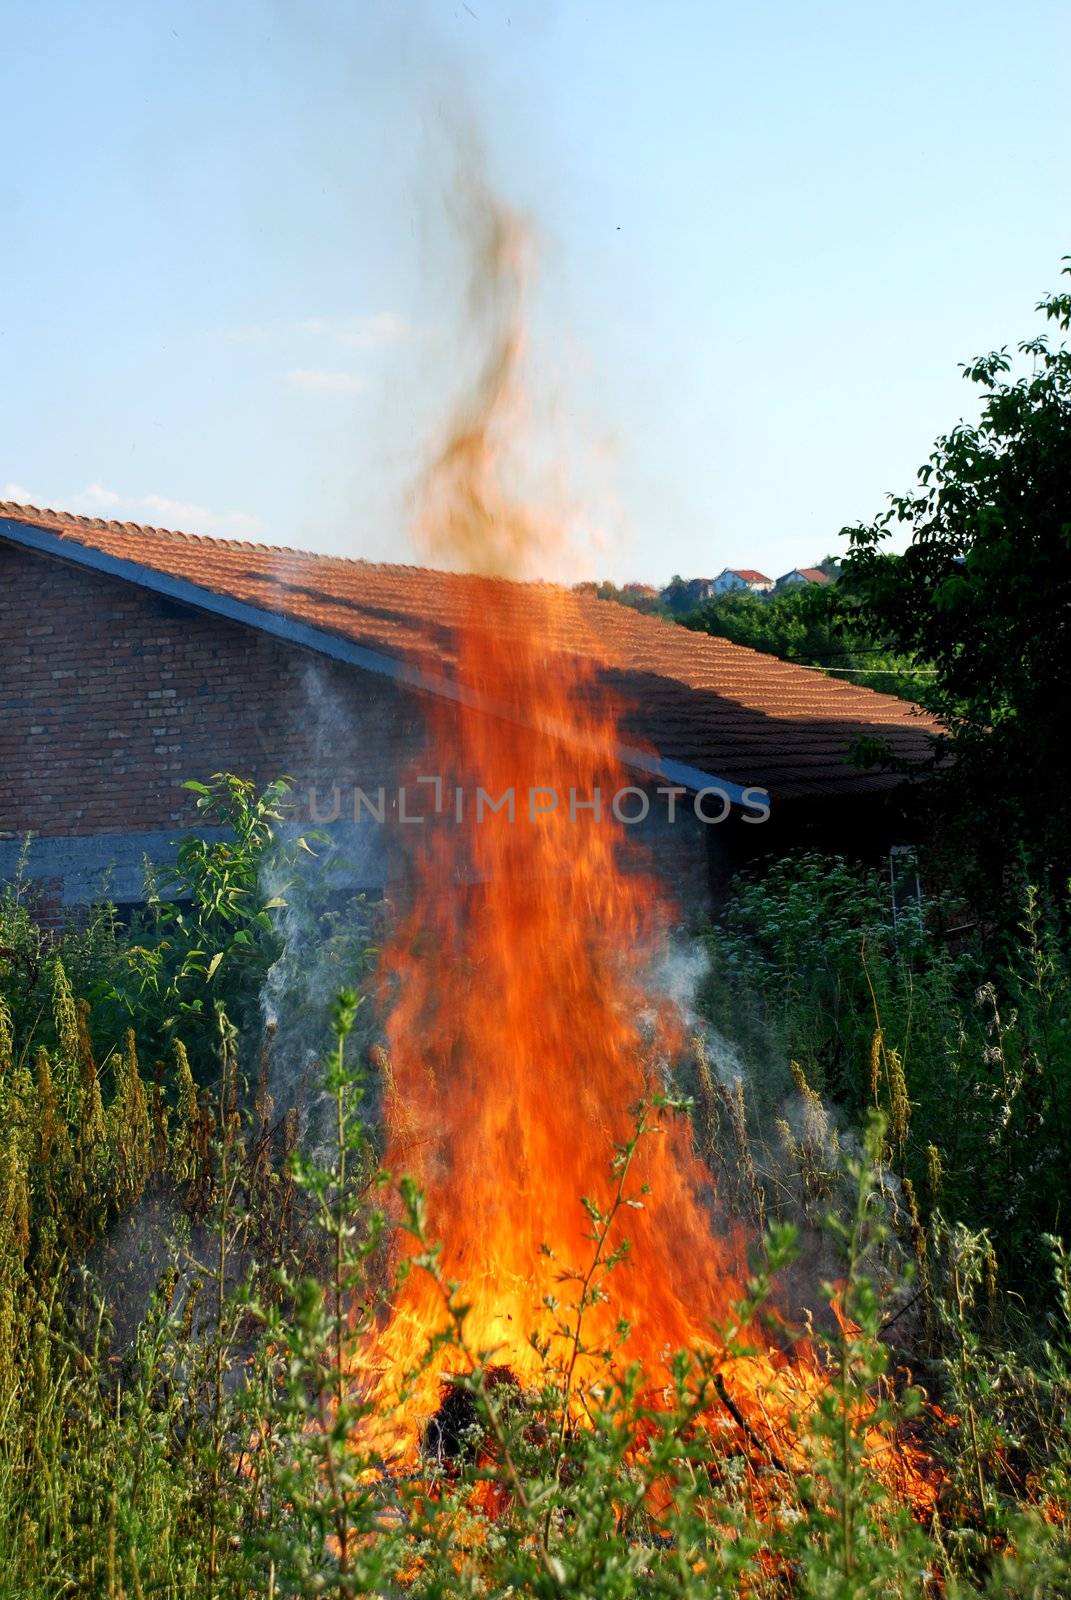 orange flame in green grass by brick house with tiled roof